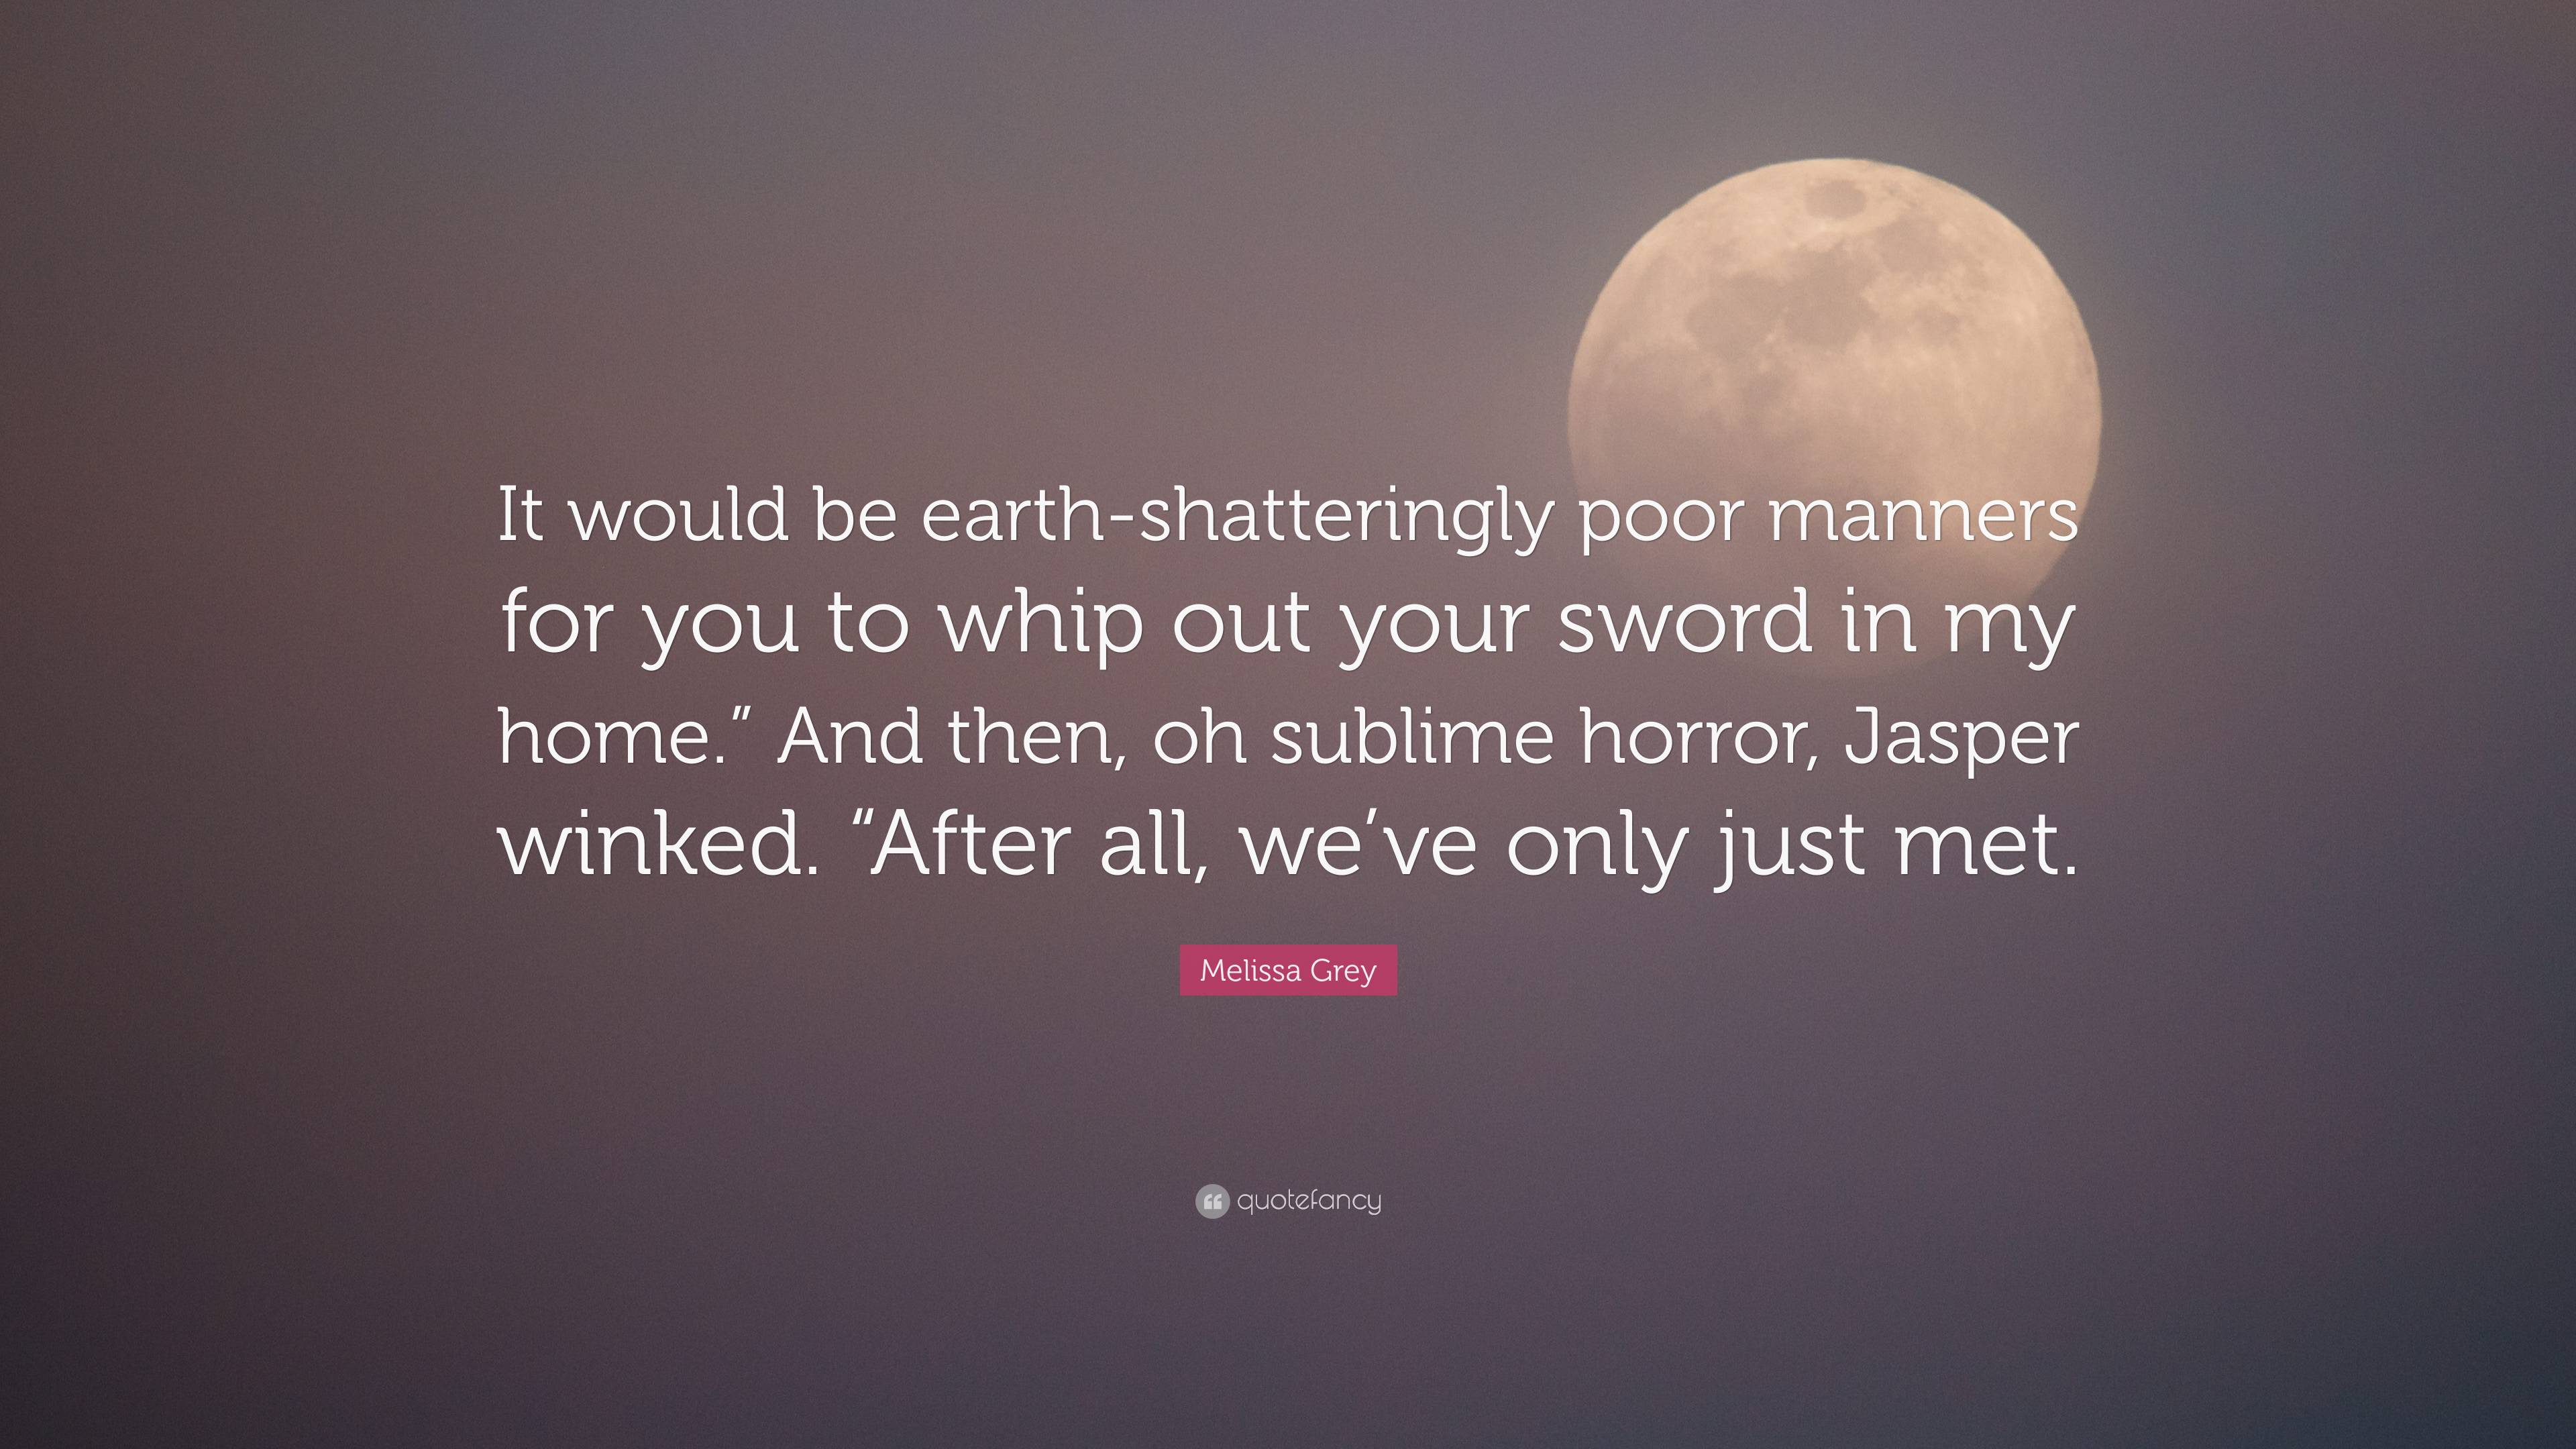 Melissa Grey Quote: “It would be earth-shatteringly poor manners for ...